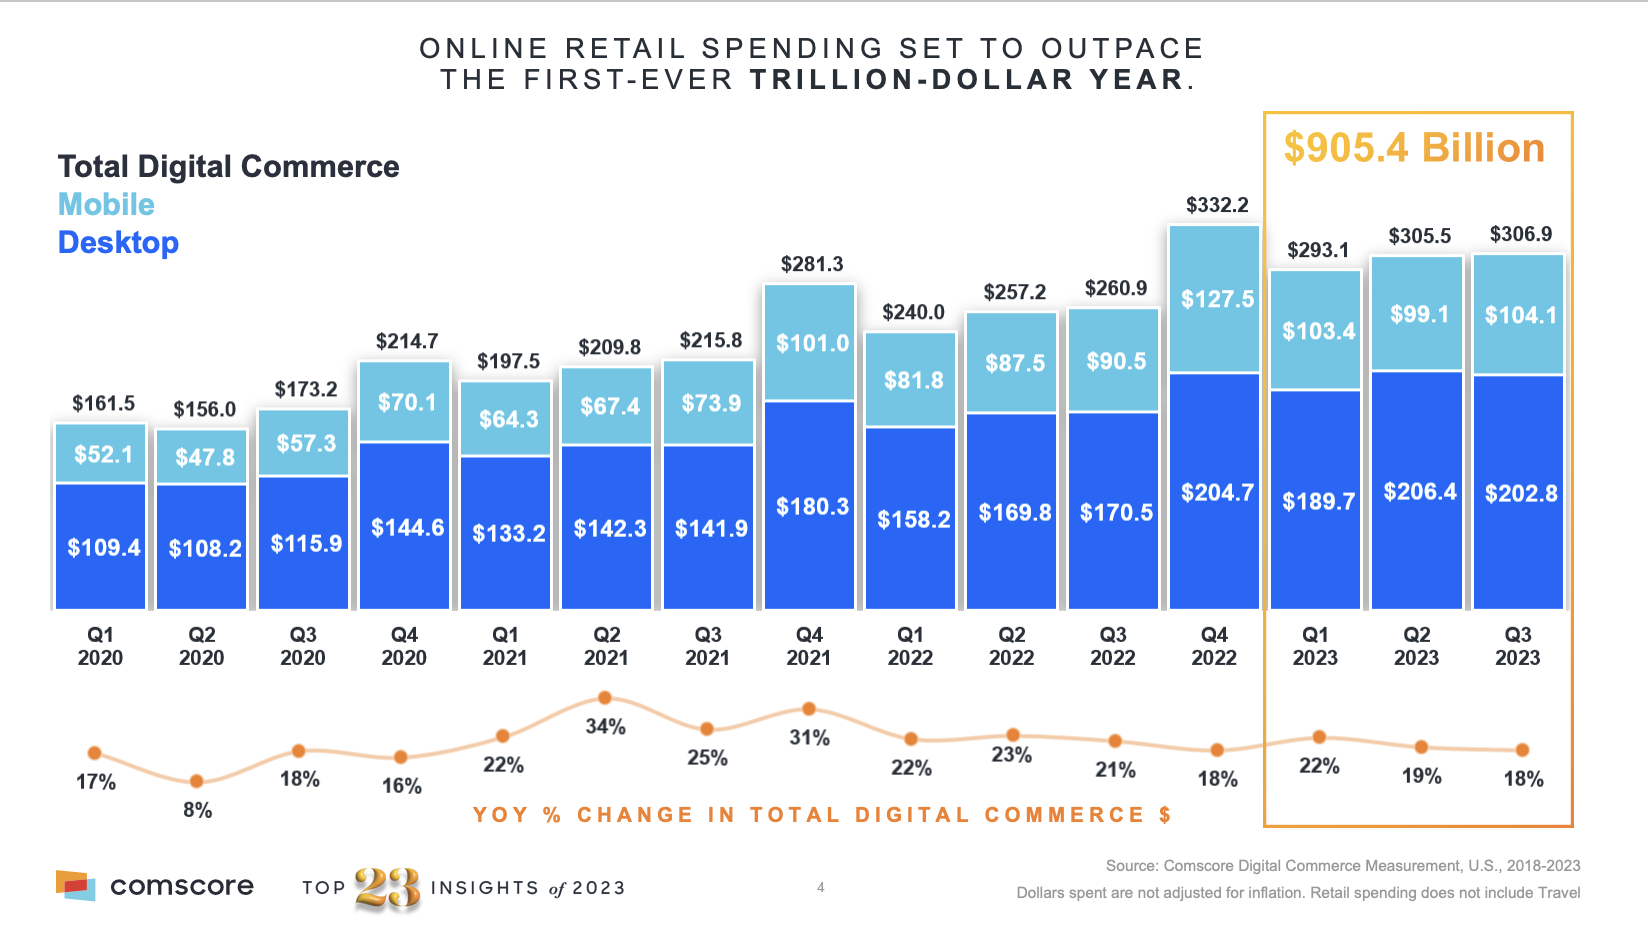 Online-Retail-Spending-Set-to-Outpace-The-First-Ever-Trillion-Dollar-Year